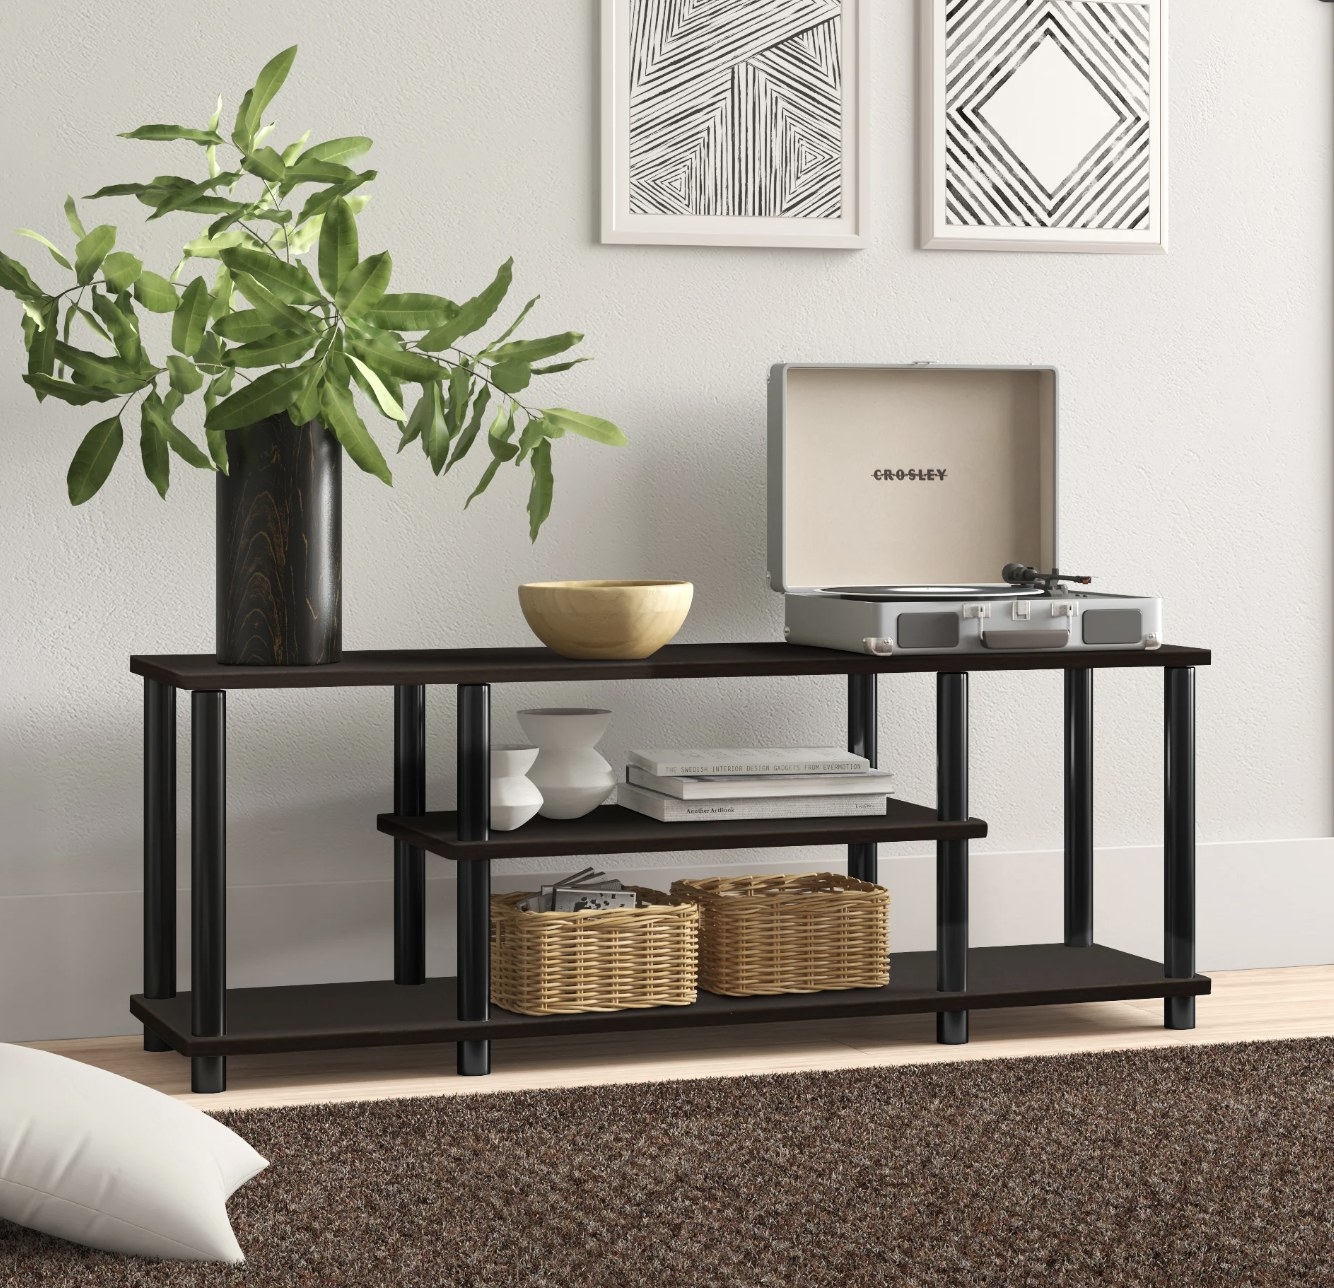 A black open shelve TV stand with a plant and record player on top